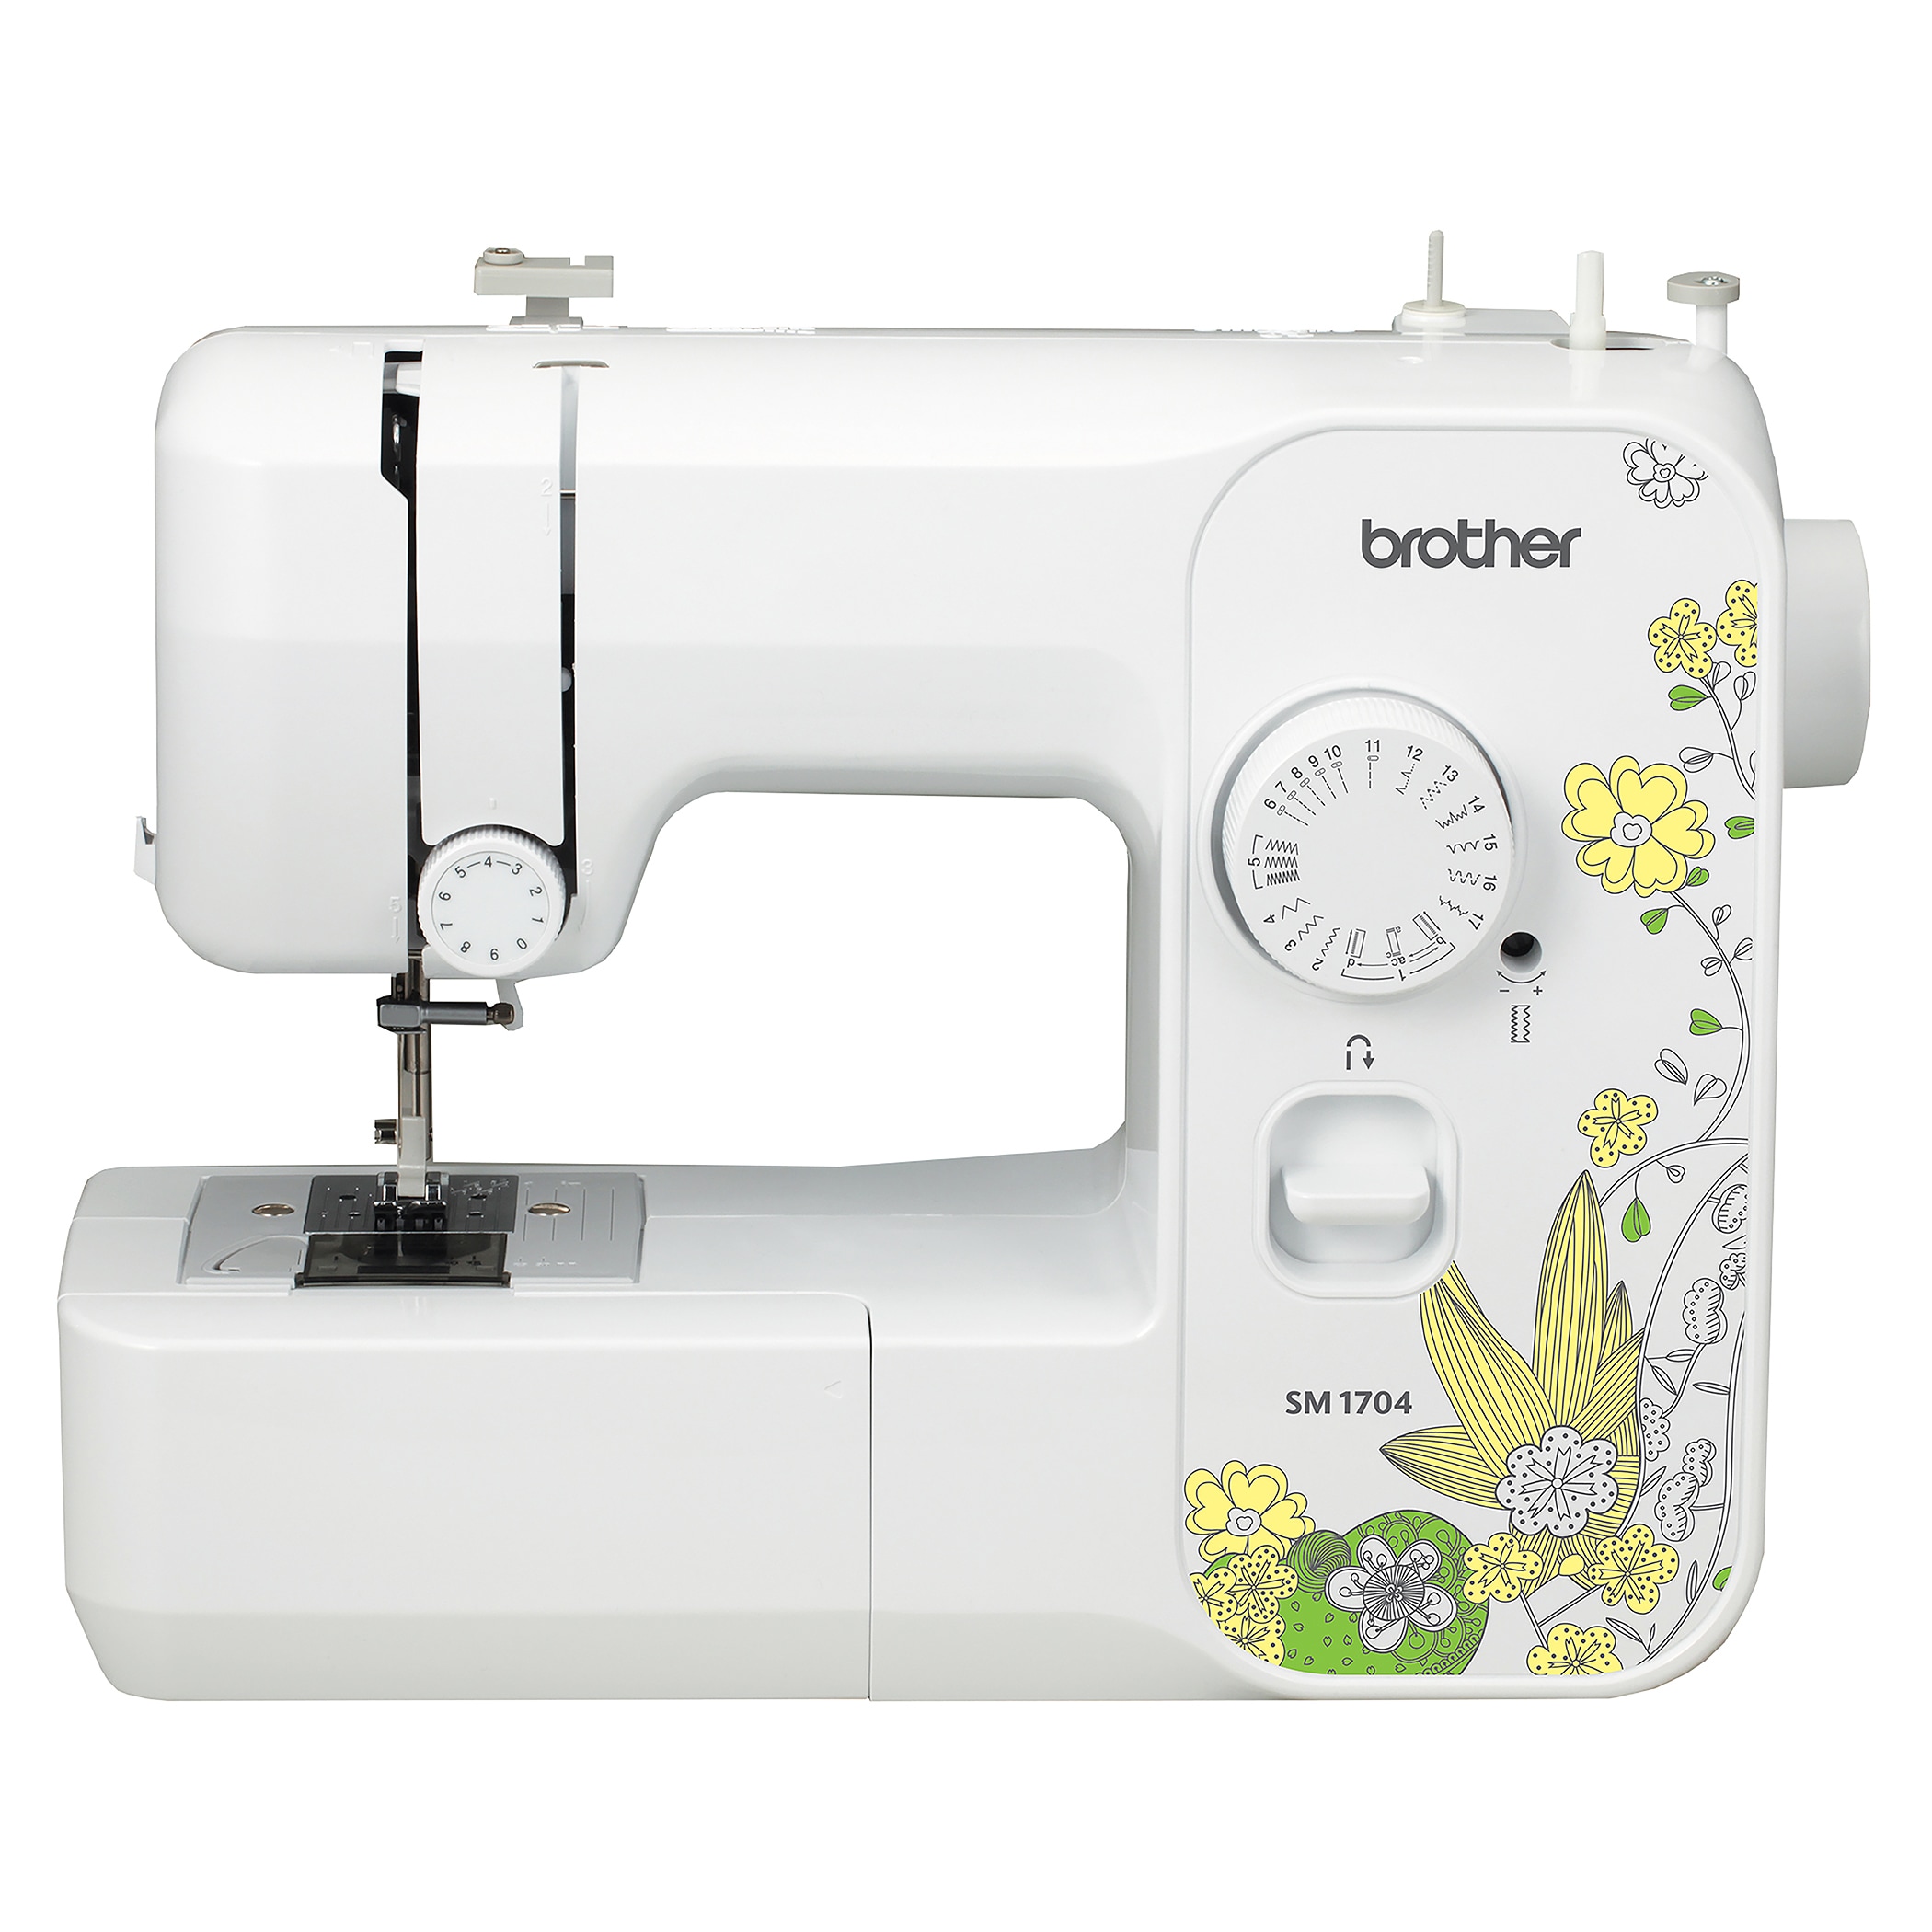 Brother SM3701 37-Stitch Lightweight Portable Sewing Machine with BONUS  Accessories Including Additional Feet, Needle sets, Bobbins and More 